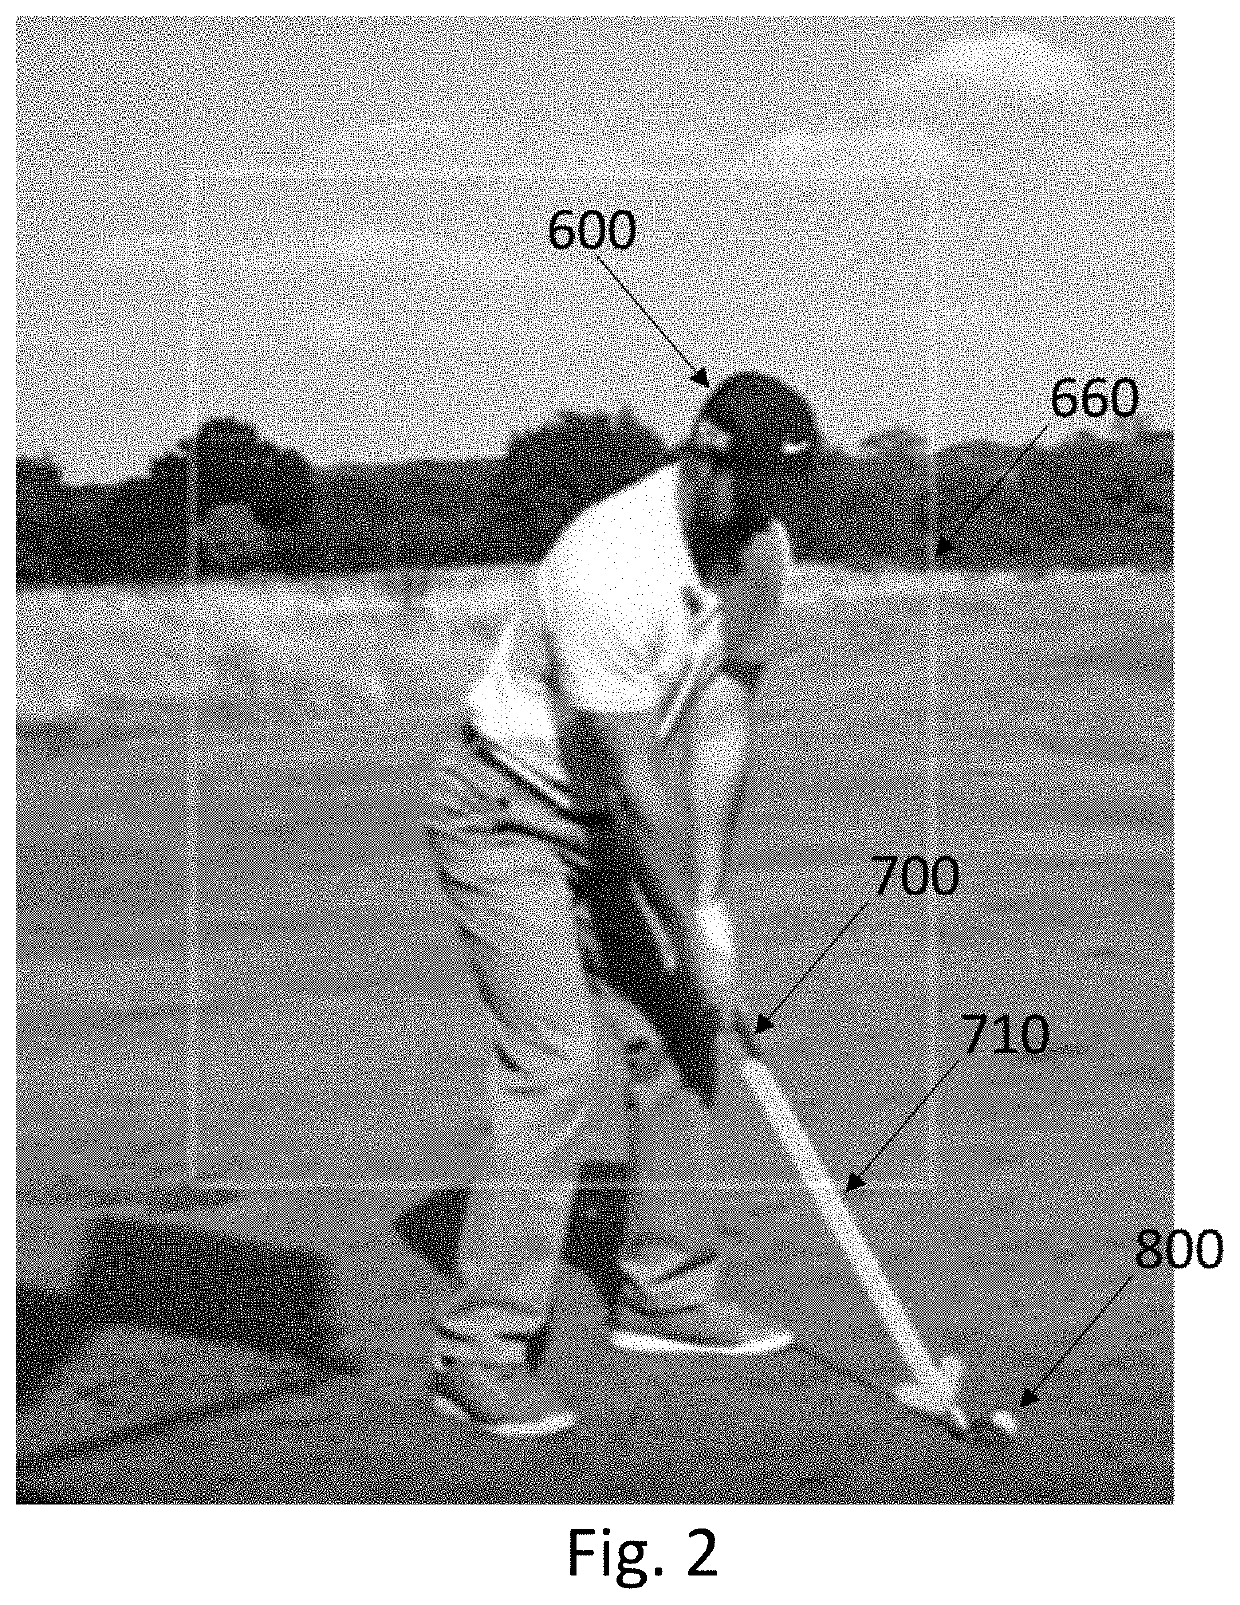 Golf game video analytic system